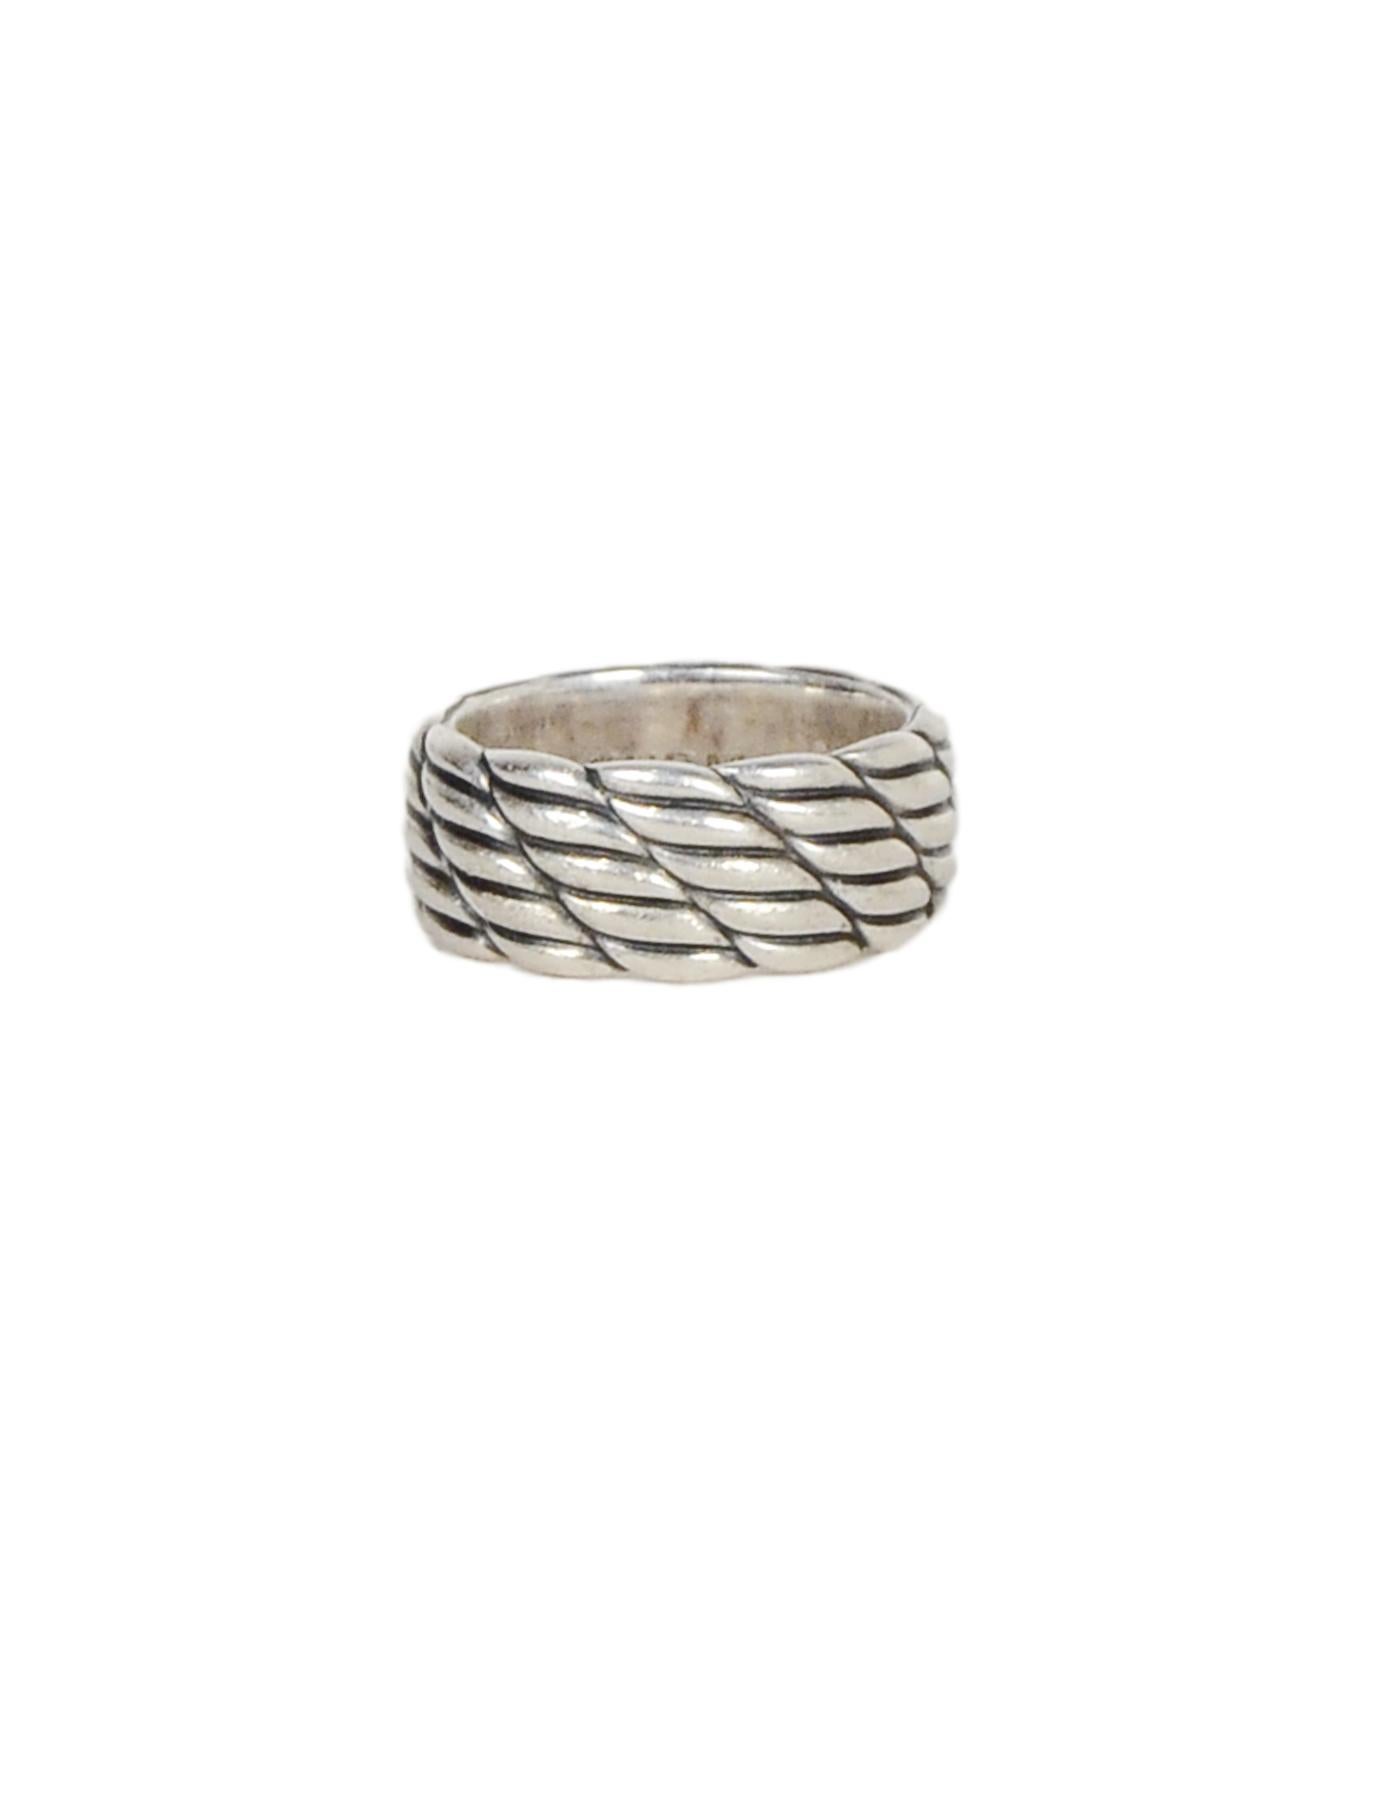 David Yurman Men's Sterling Silver Rope Ring sz 9.5
Color: Silvertone
Materials: Sterling silver
Hallmarks: © David Yurman 925
Closure/Opening: Slide On
Overall Condition: Very good pre-owned condition, with minor hairline scratches to